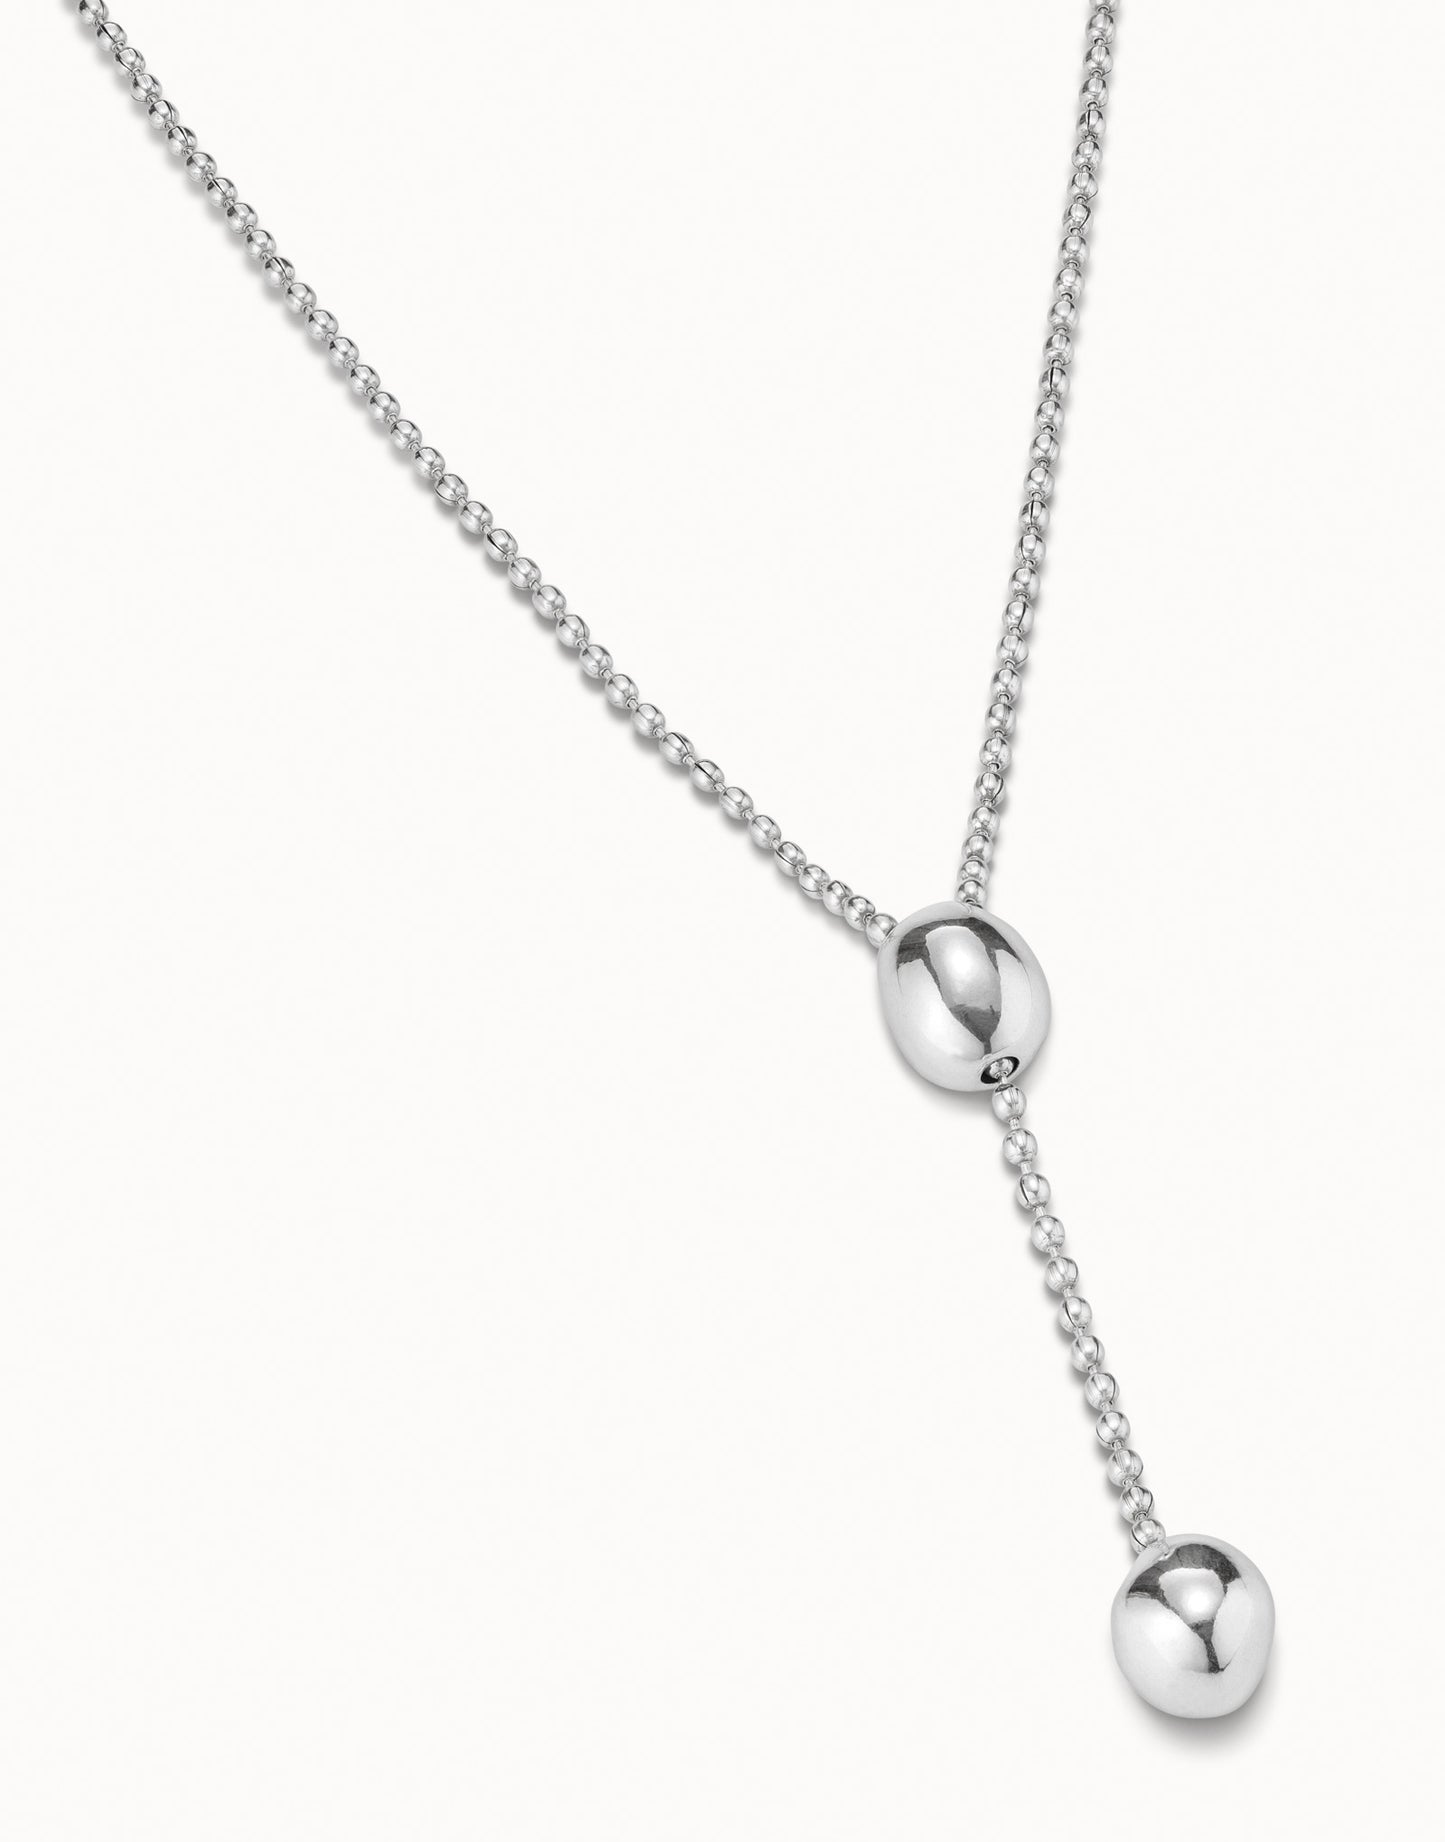 NECKLACE LONELY PLANET